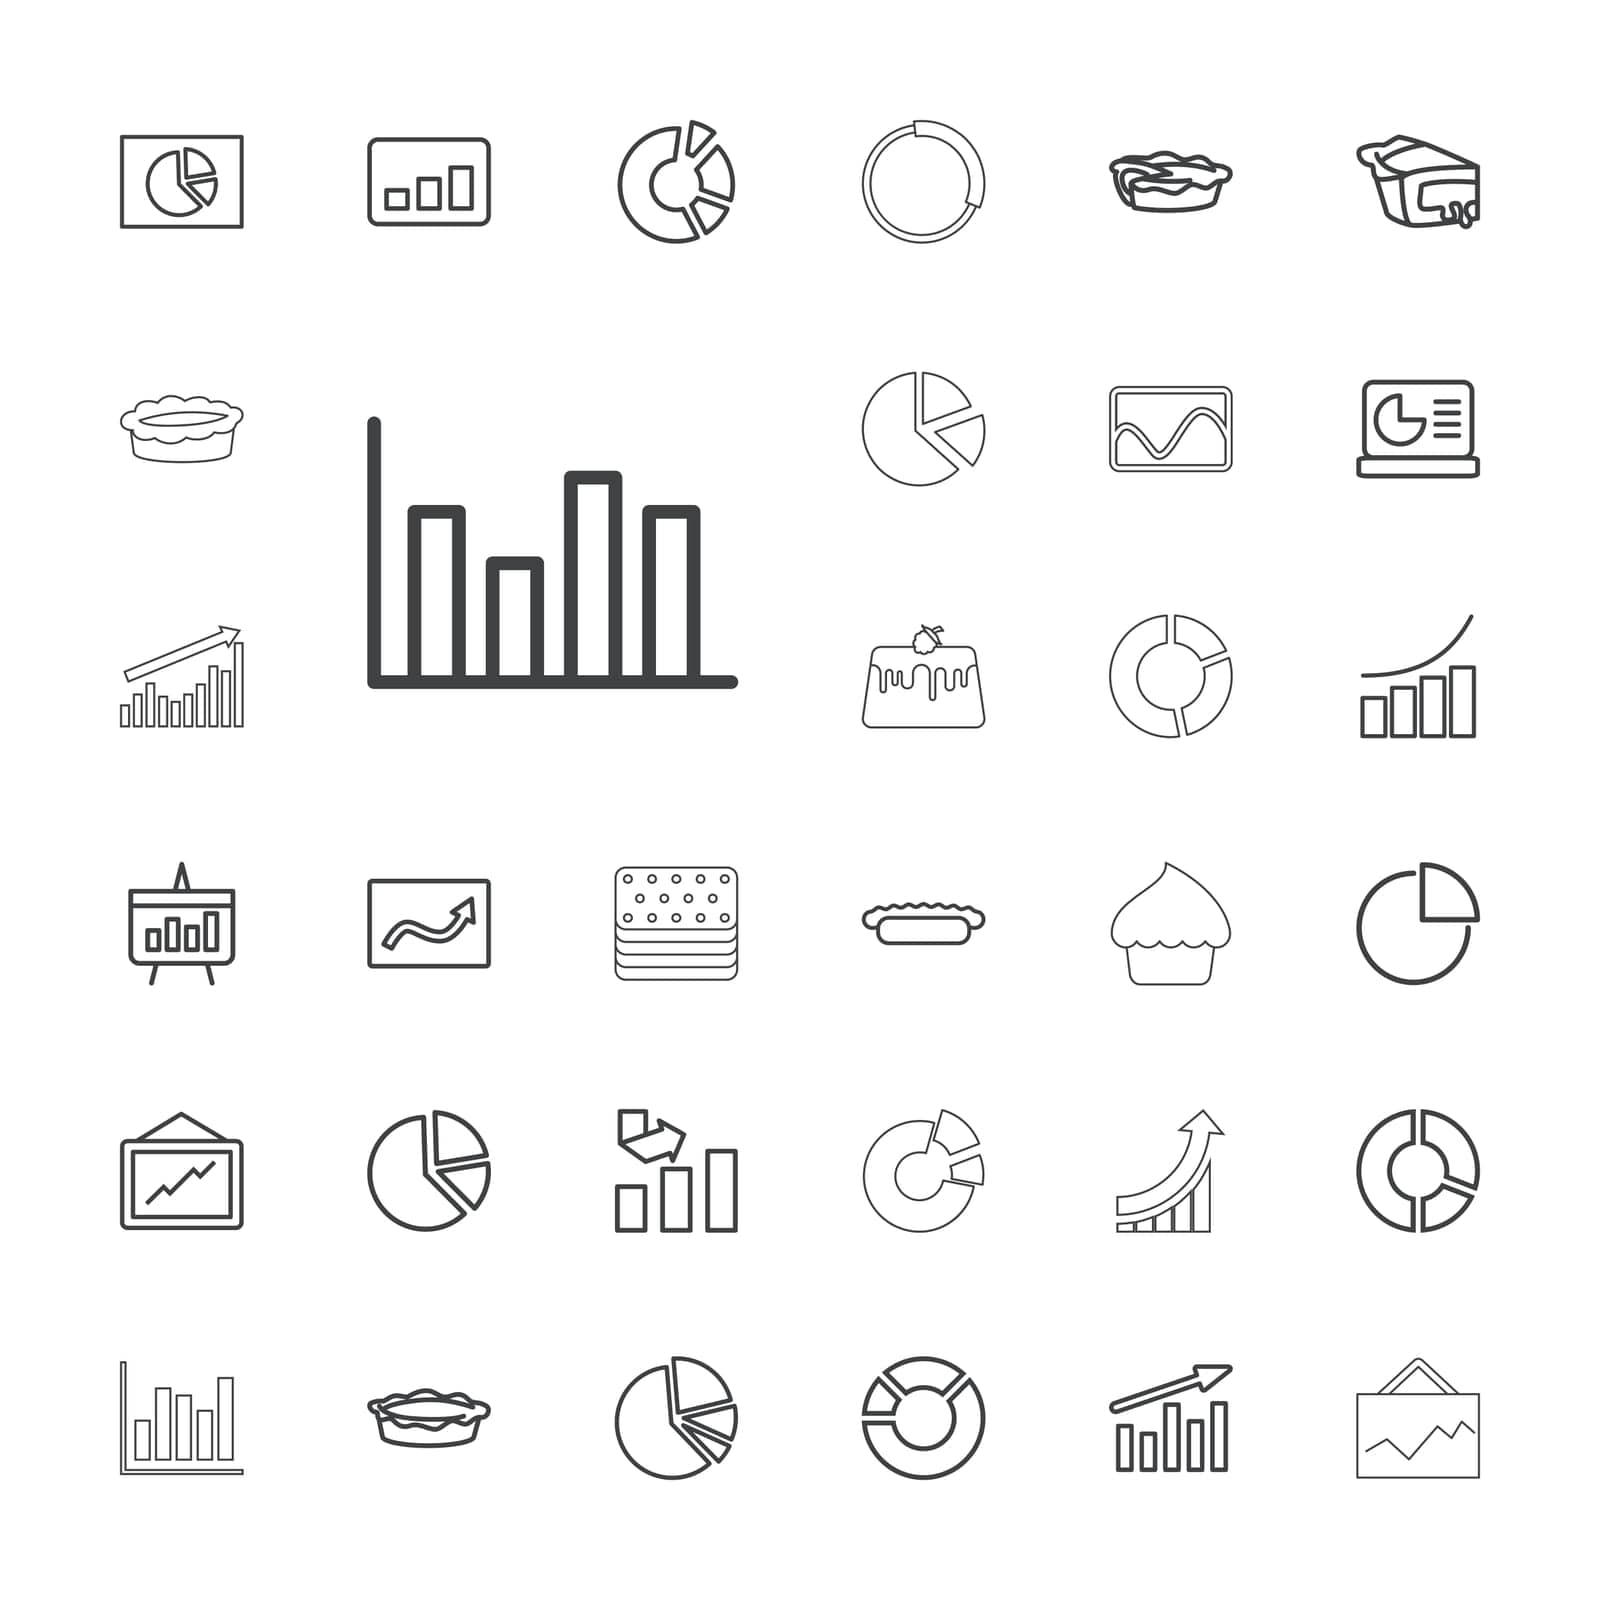 symbol,infographic,arrow,line,concept,icon,sign,isolated,pie,bar,white,web,flat,cake,design,of,vector,graphic,element,on,statistic,art,set,business,display,black,abstract,economy,graph,diagram,market,piece,background,information,growth,illustration,chart,finance